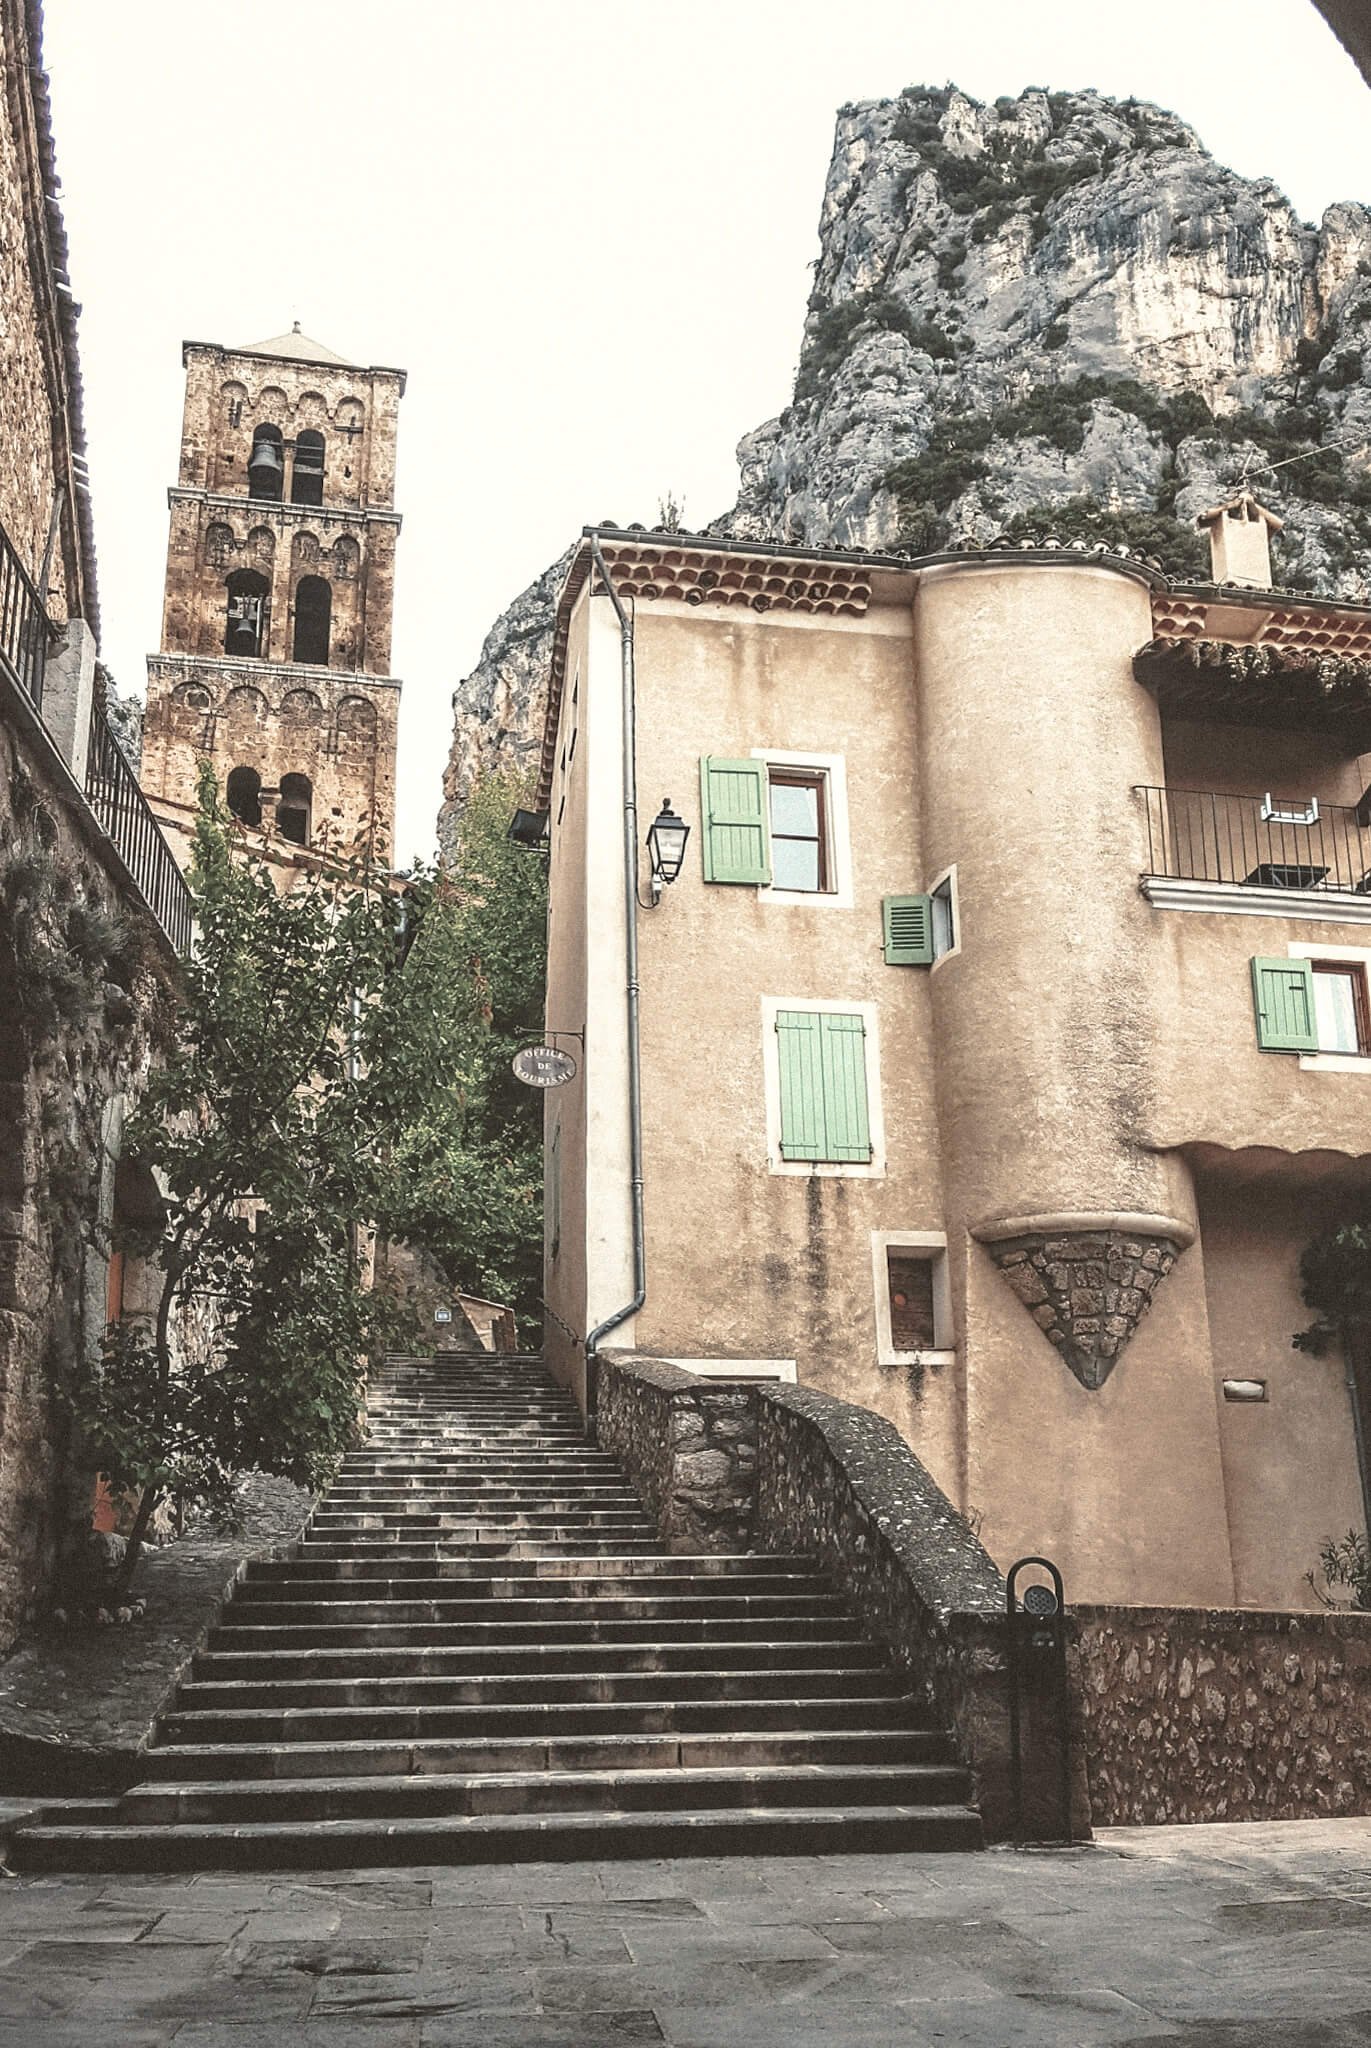 Small French town of Moustiers Sainte Marie